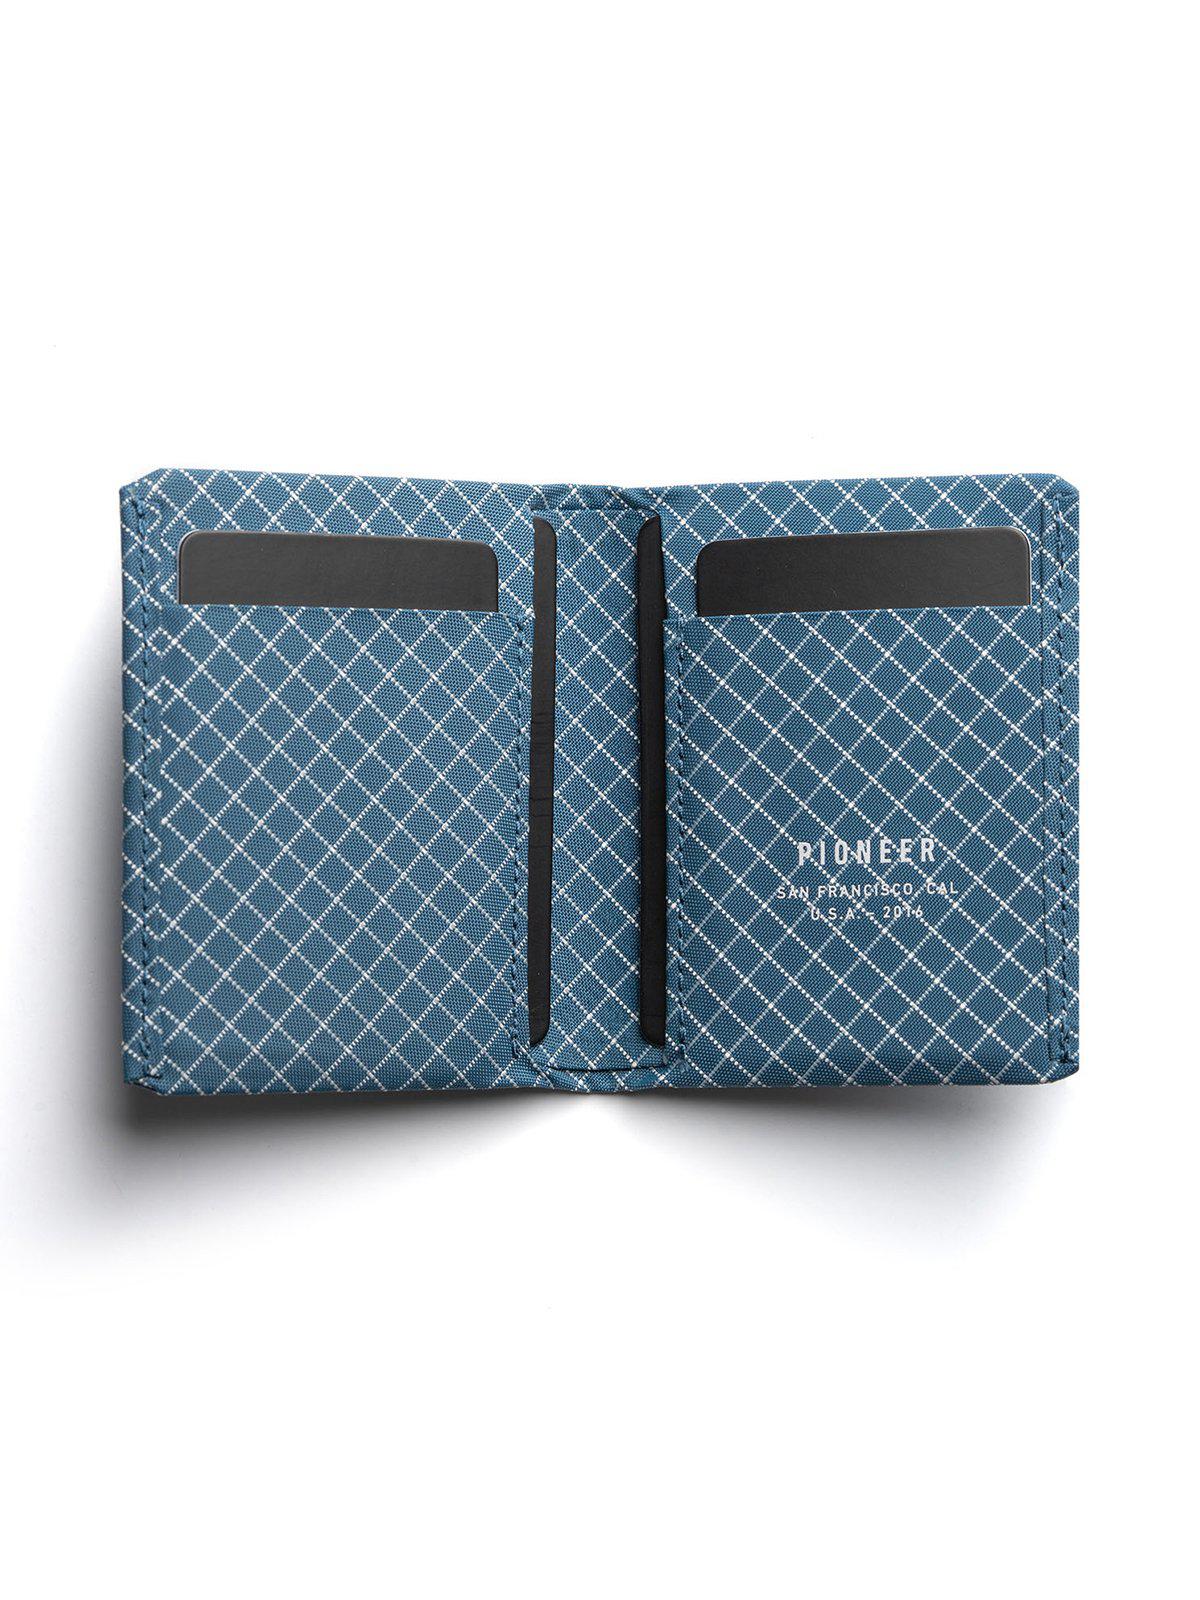 Pioneer Matter Bifold Wallet 10XD Ripstop Blue - MORE by Morello Indonesia